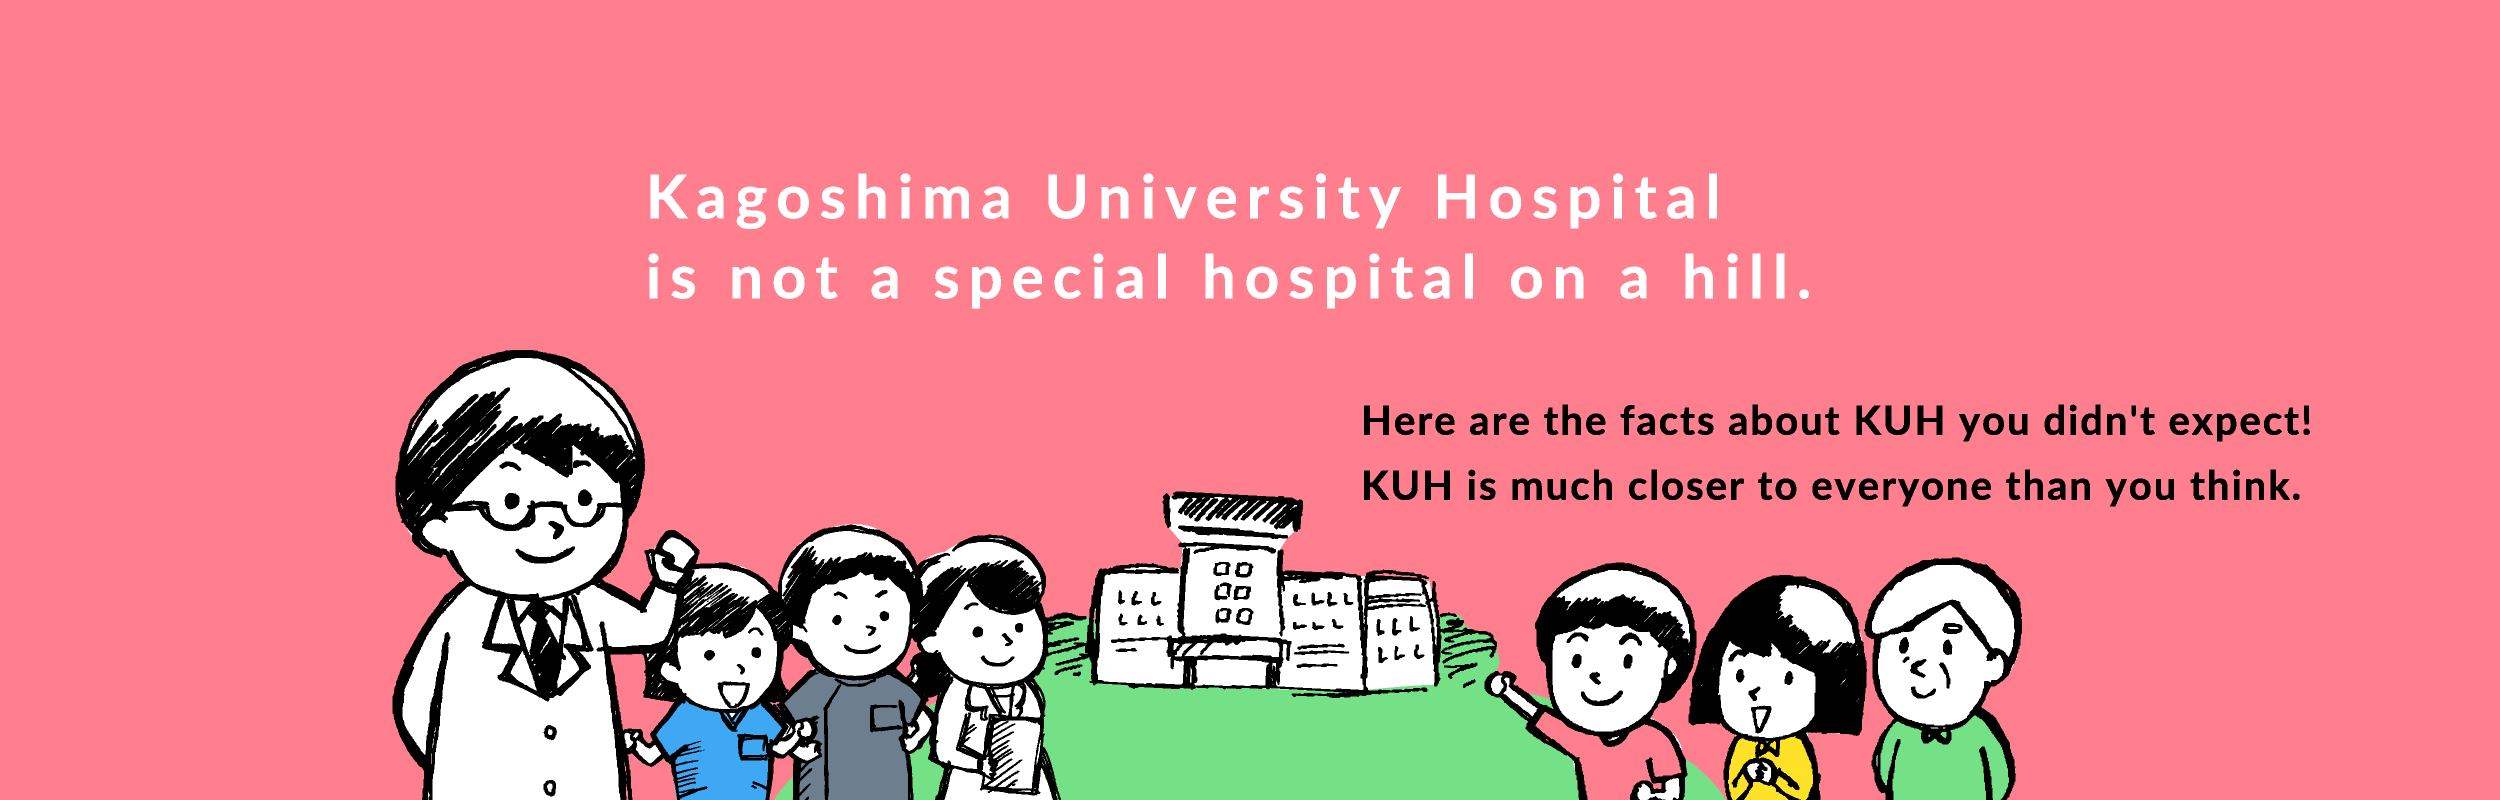 Here are the facts about KUH you didn't expect! KUH is much closer to everyone than you think.